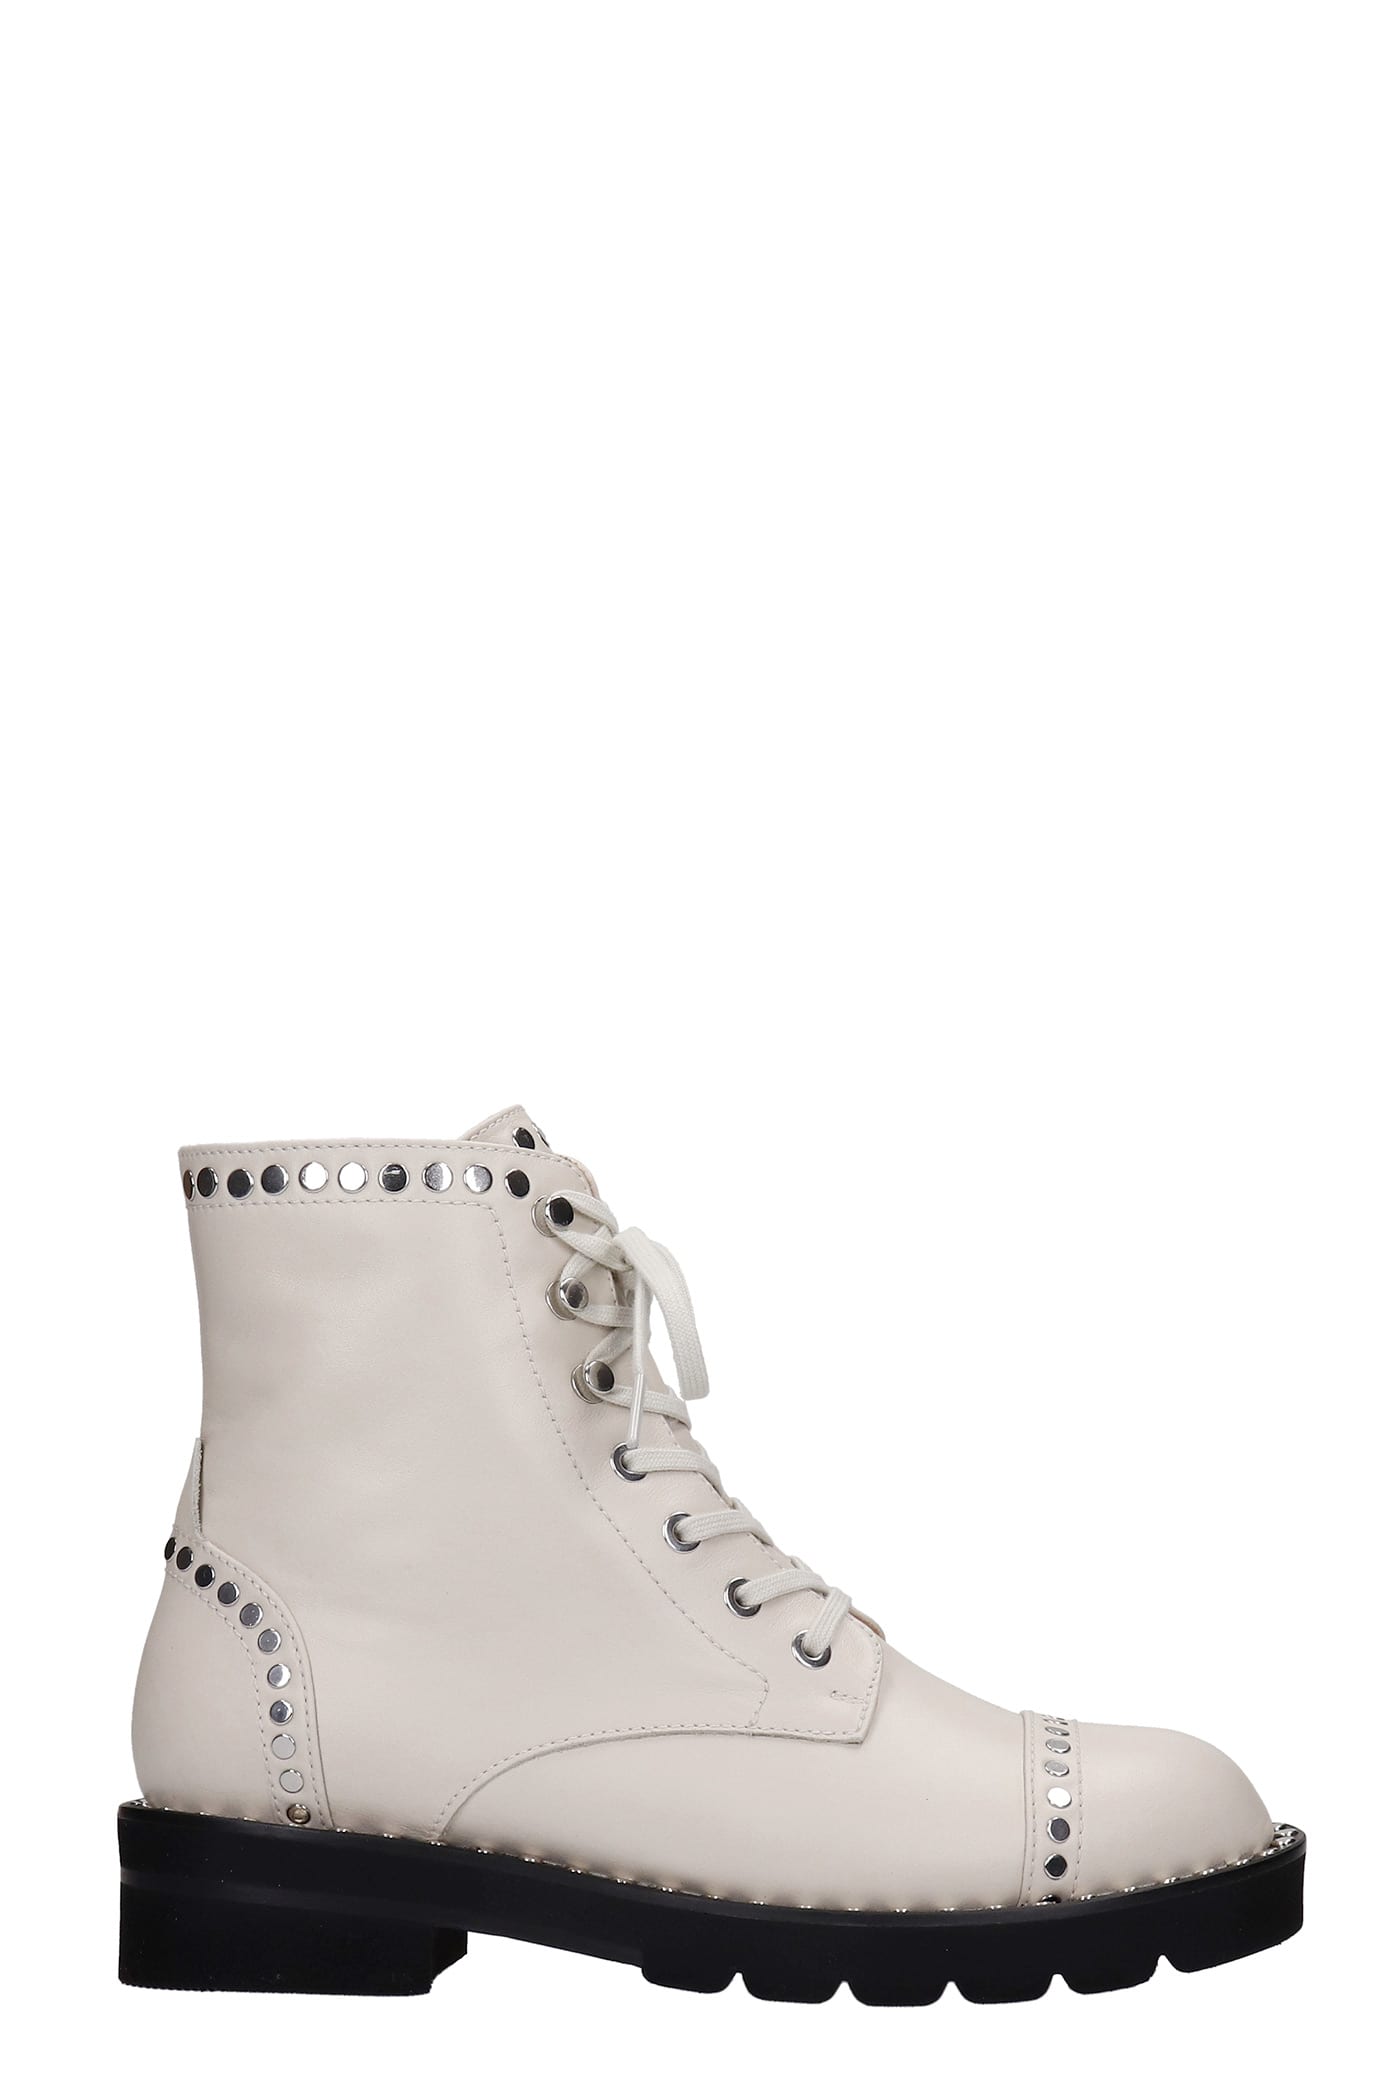 Buy Stuart Weitzman Mila Lift Studs Combat Boots In White Leather online, shop Stuart Weitzman shoes with free shipping